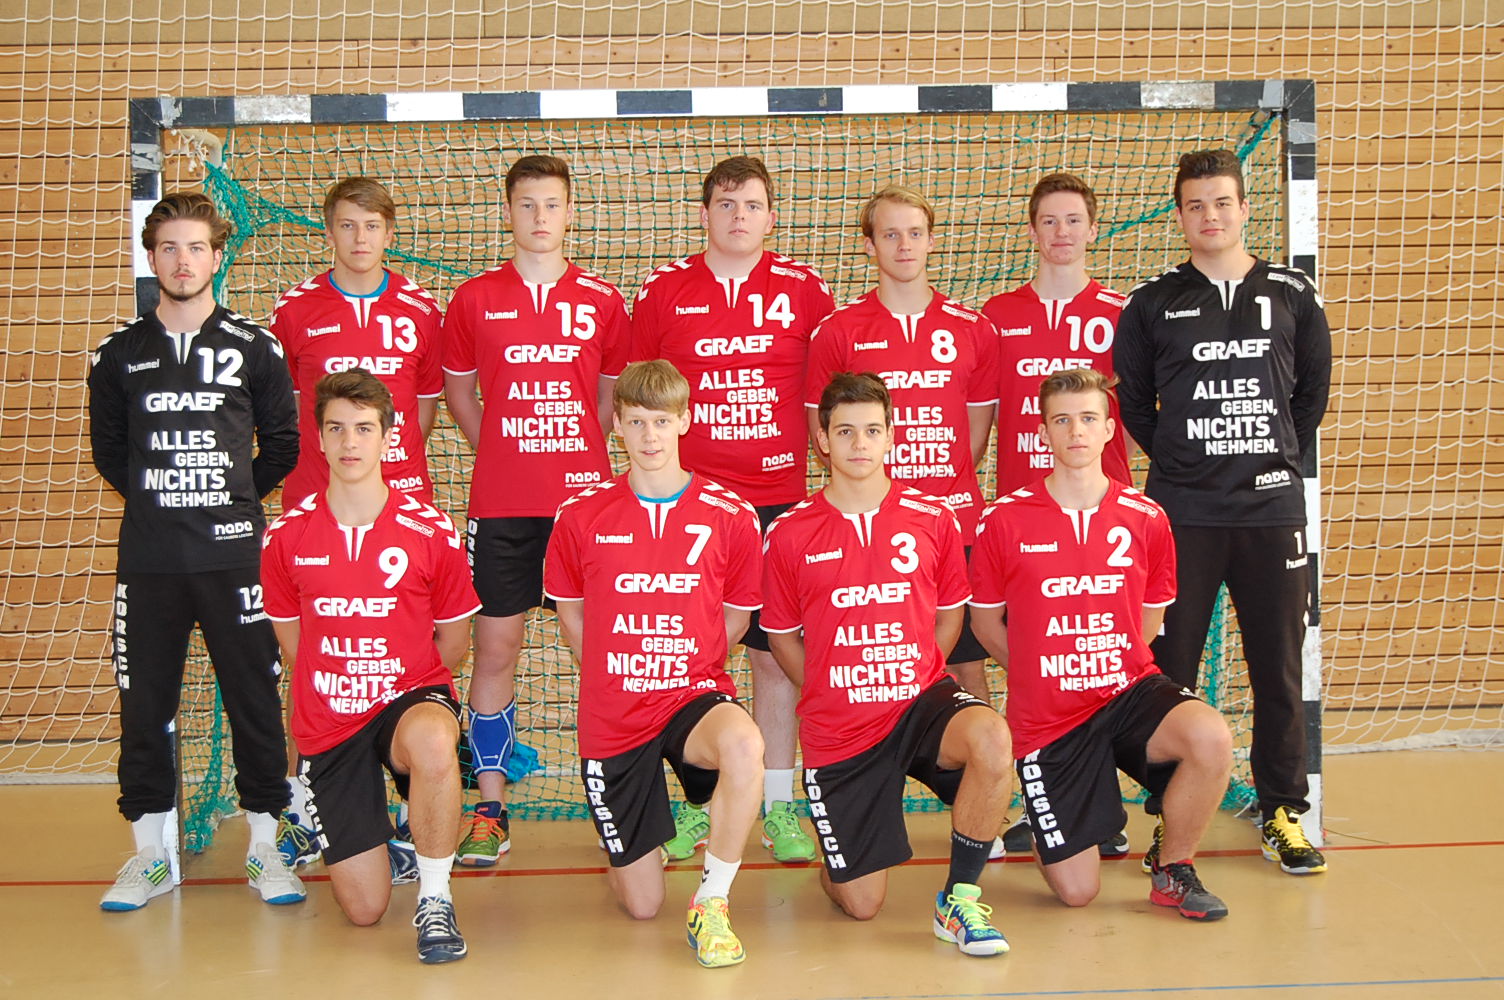 Group picture of the SG Hermdsdorf-Waidmannslust handball team wearing the slogan GIVE EVERYTHING, TAKE NOTHING on their warm-up jerseys.